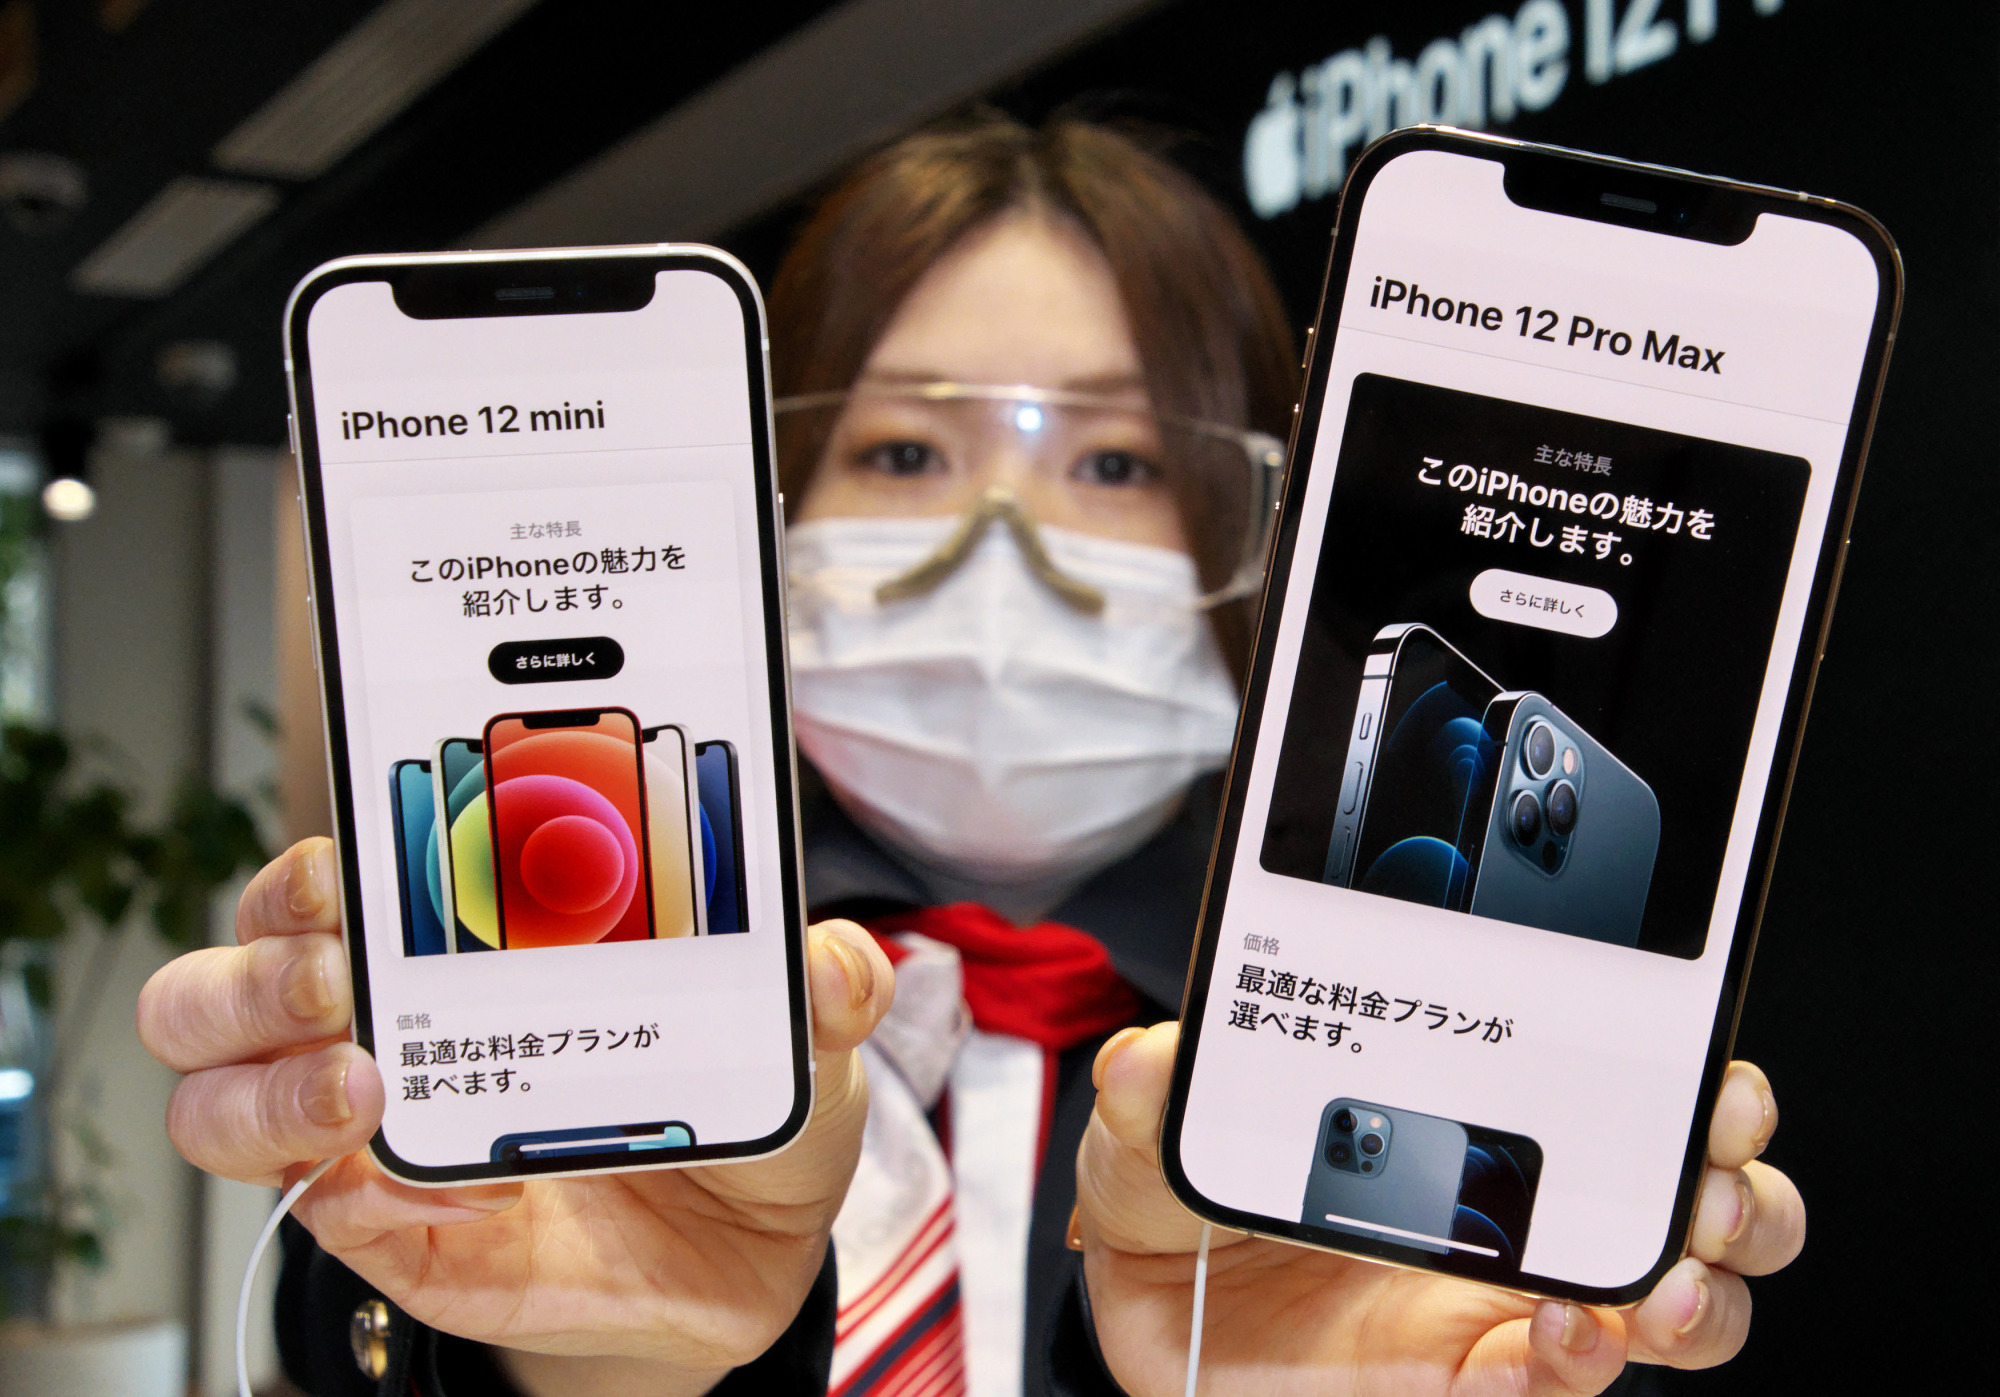 Image of woman holding up the iPhone 12 mini and iPhone 12 Pro Max